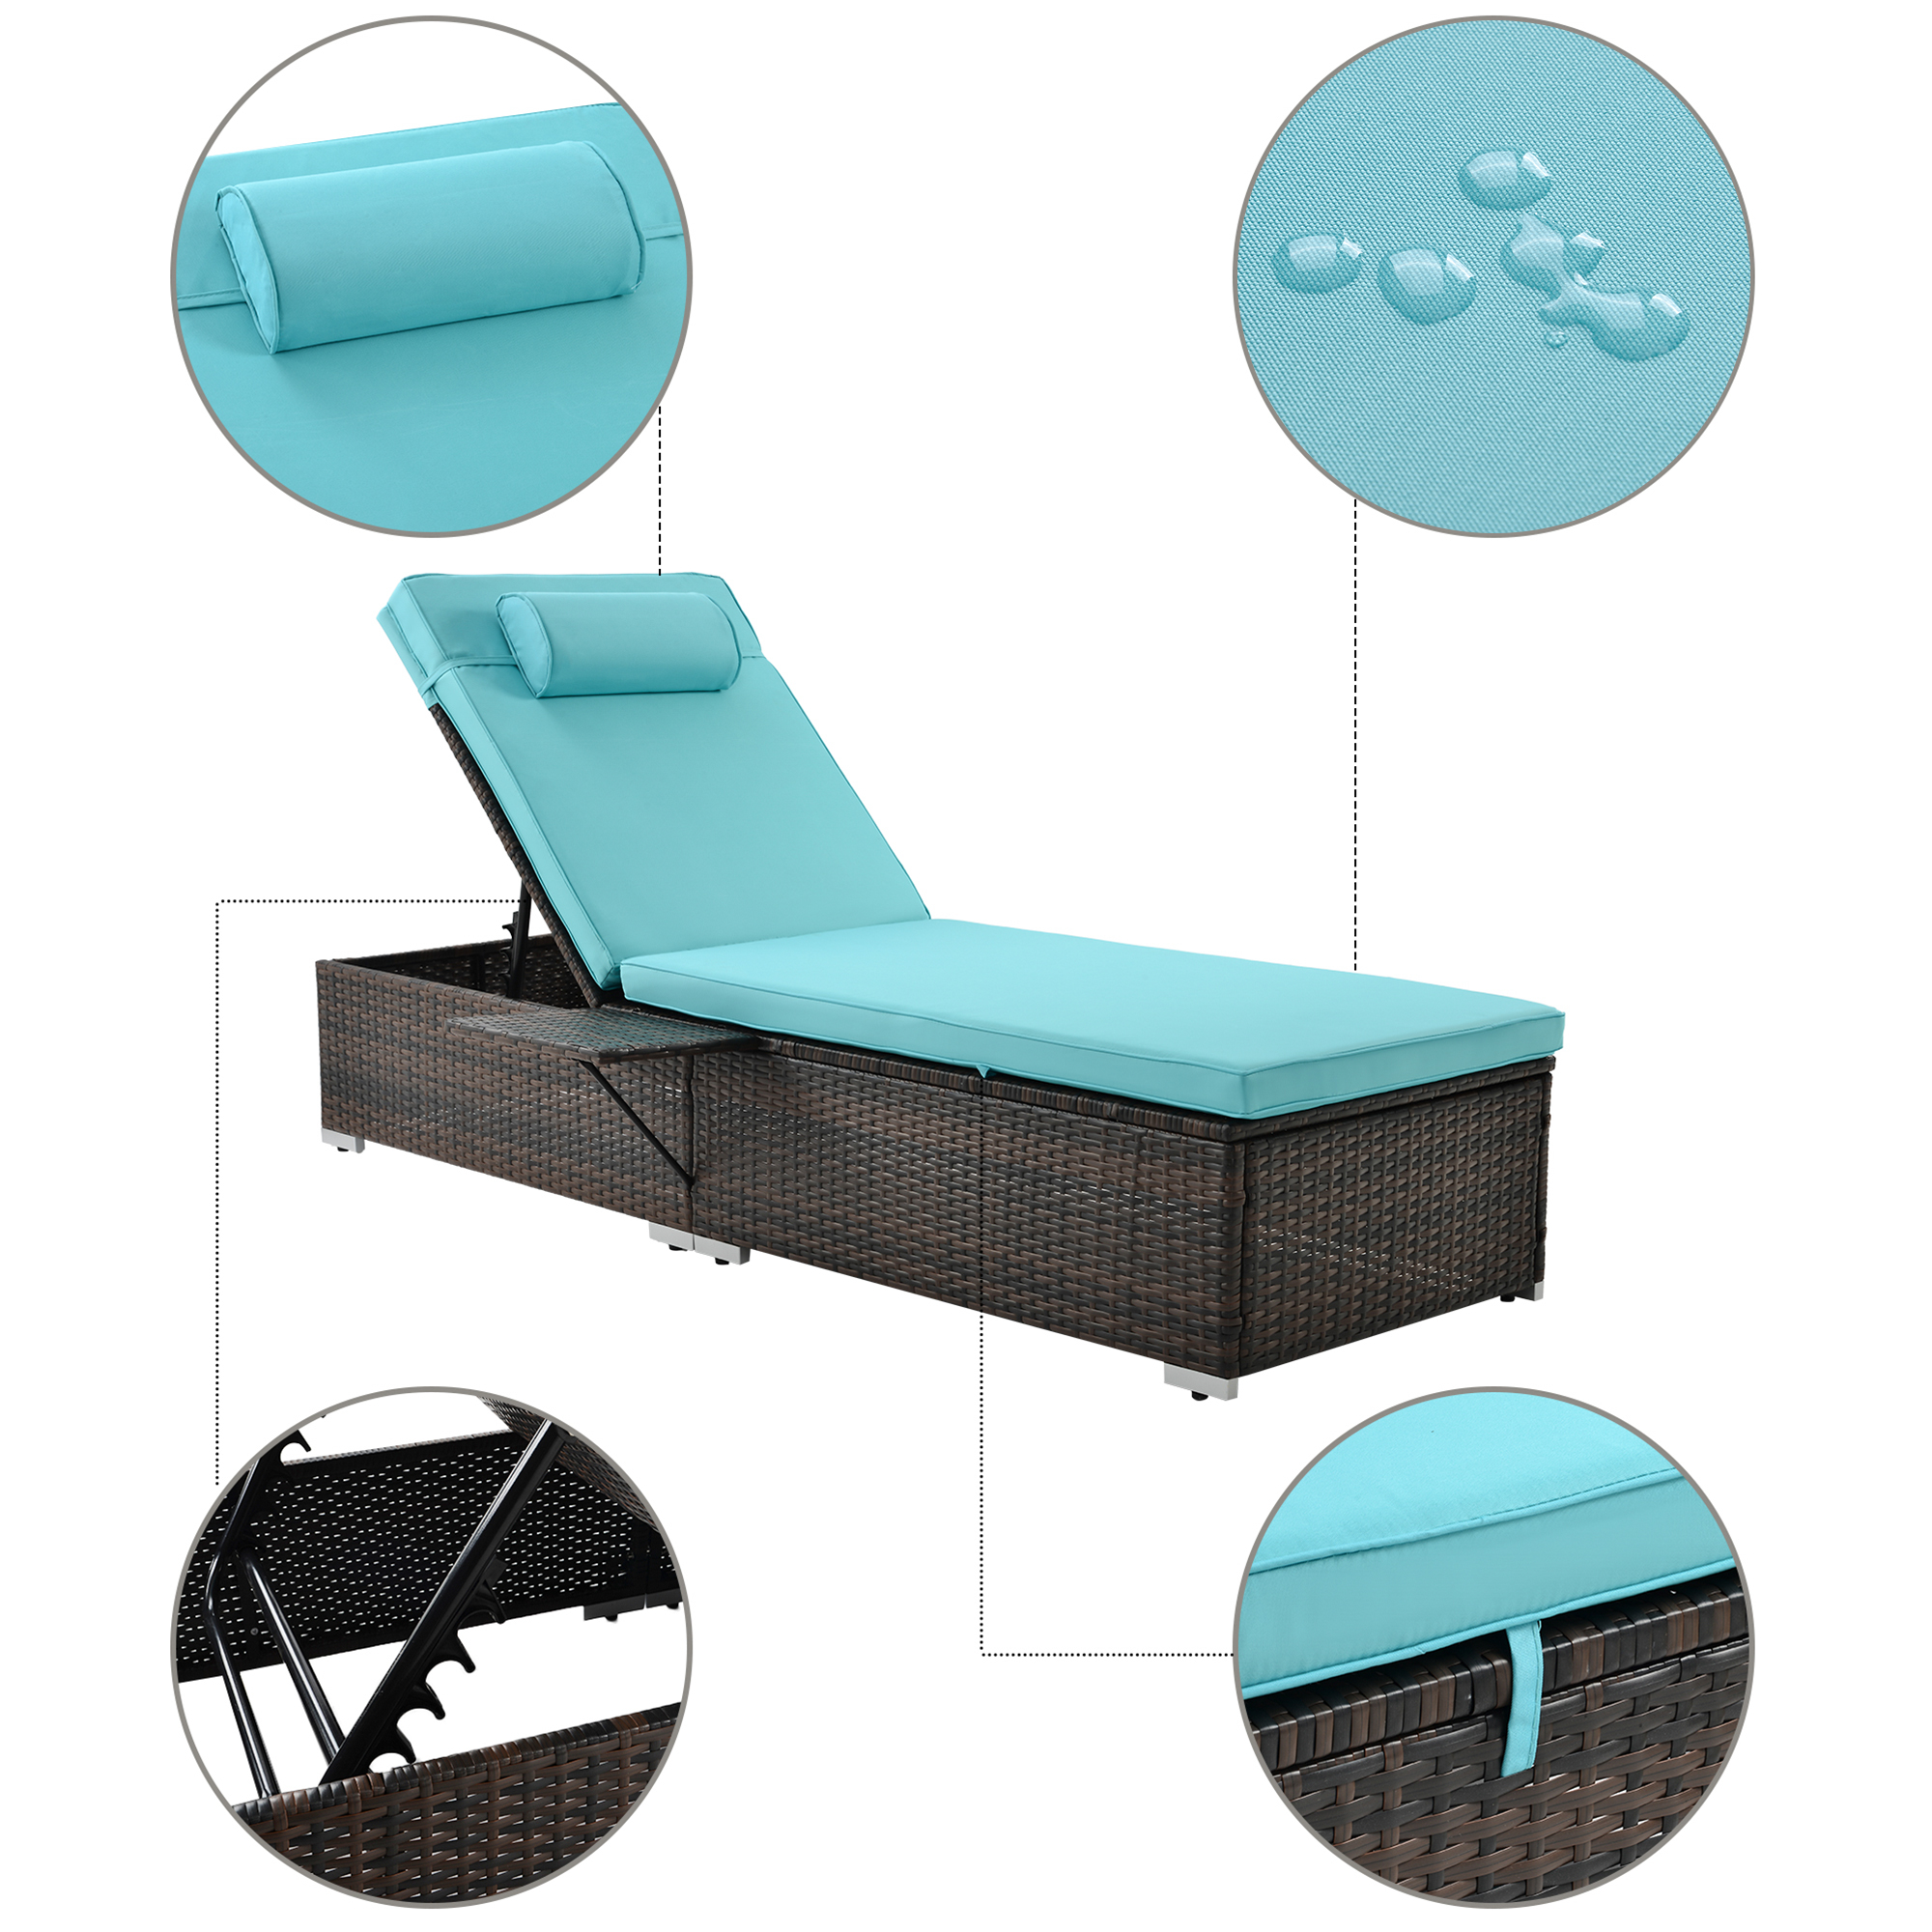 2 Pieces Outdoor Patio PE Wicker Chaise Lounge Set, Adjustable Reclining Lounge Chairs with Side Table and Head Pillow, Outdoor Chaise Lounger with Cushions for Patio Pool Backyard Porch Garden, B67 - image 5 of 11